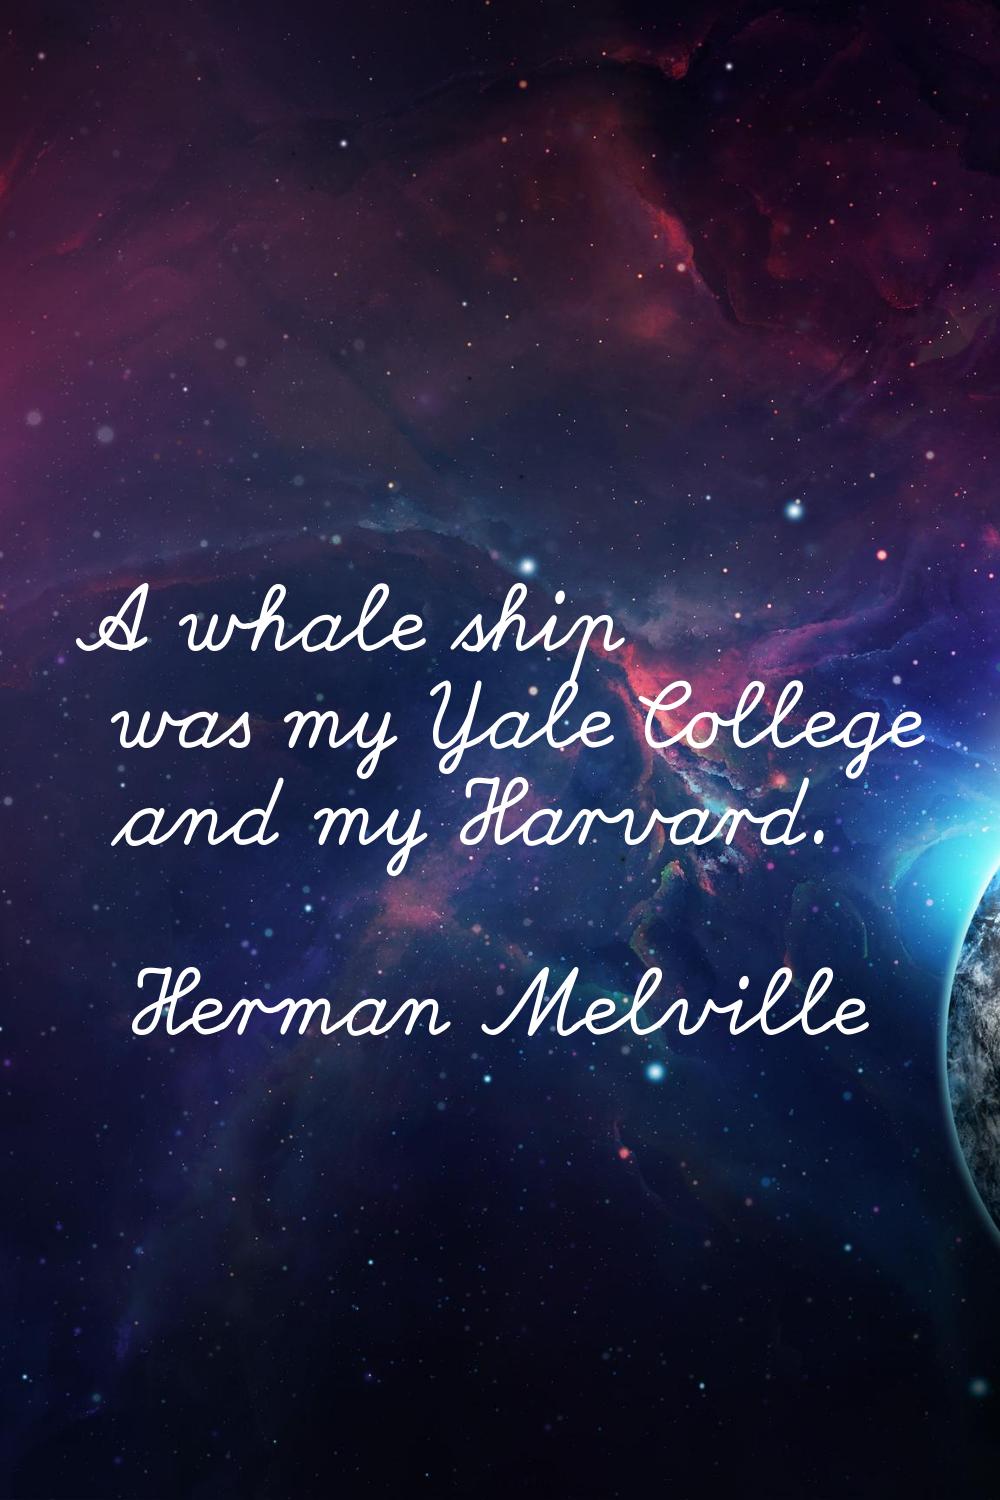 A whale ship was my Yale College and my Harvard.